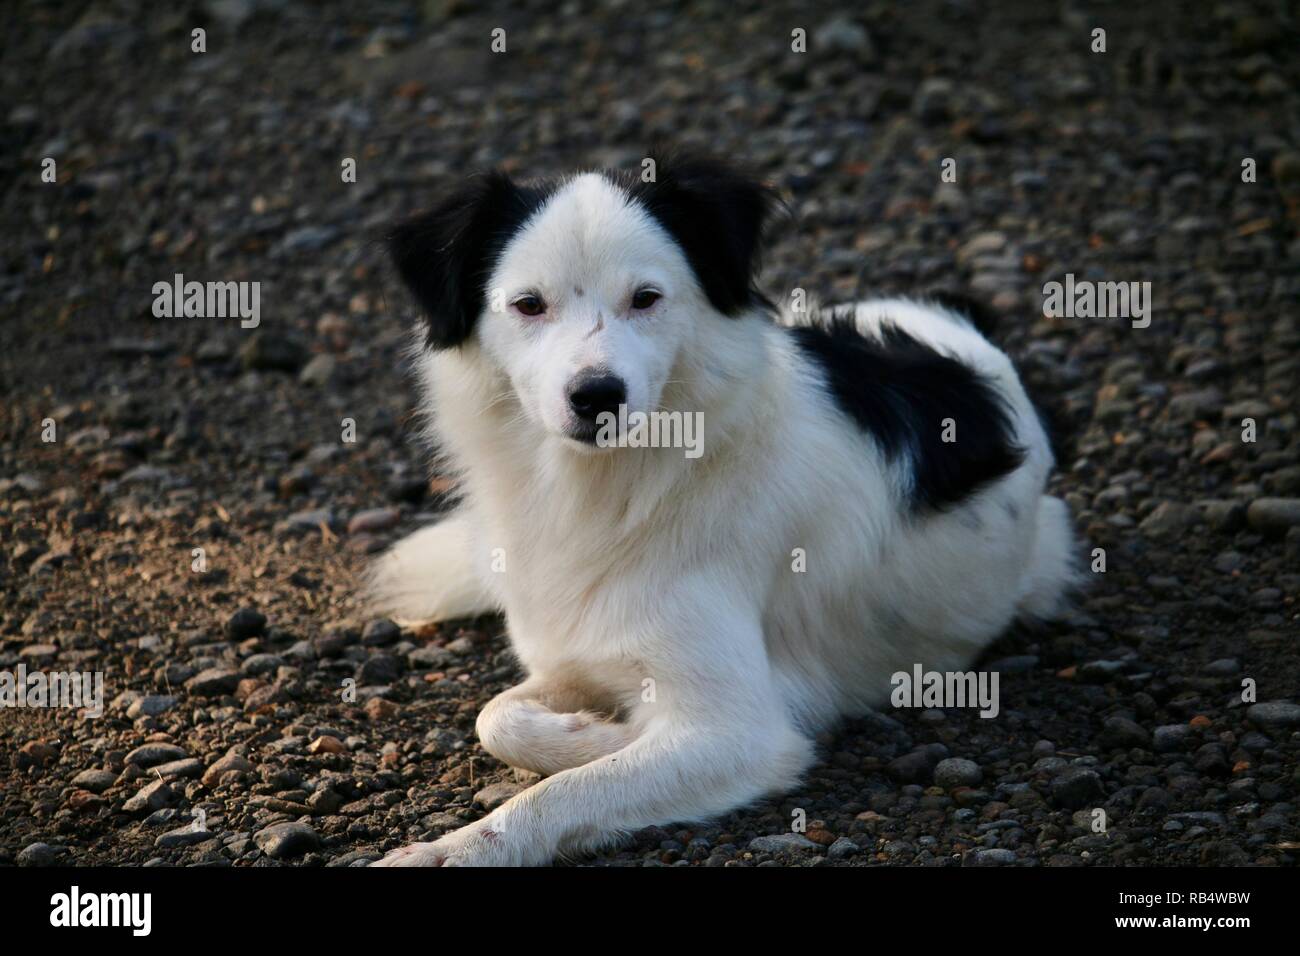 A long haired black and white dog relaxing in the early morning. Stock Photo